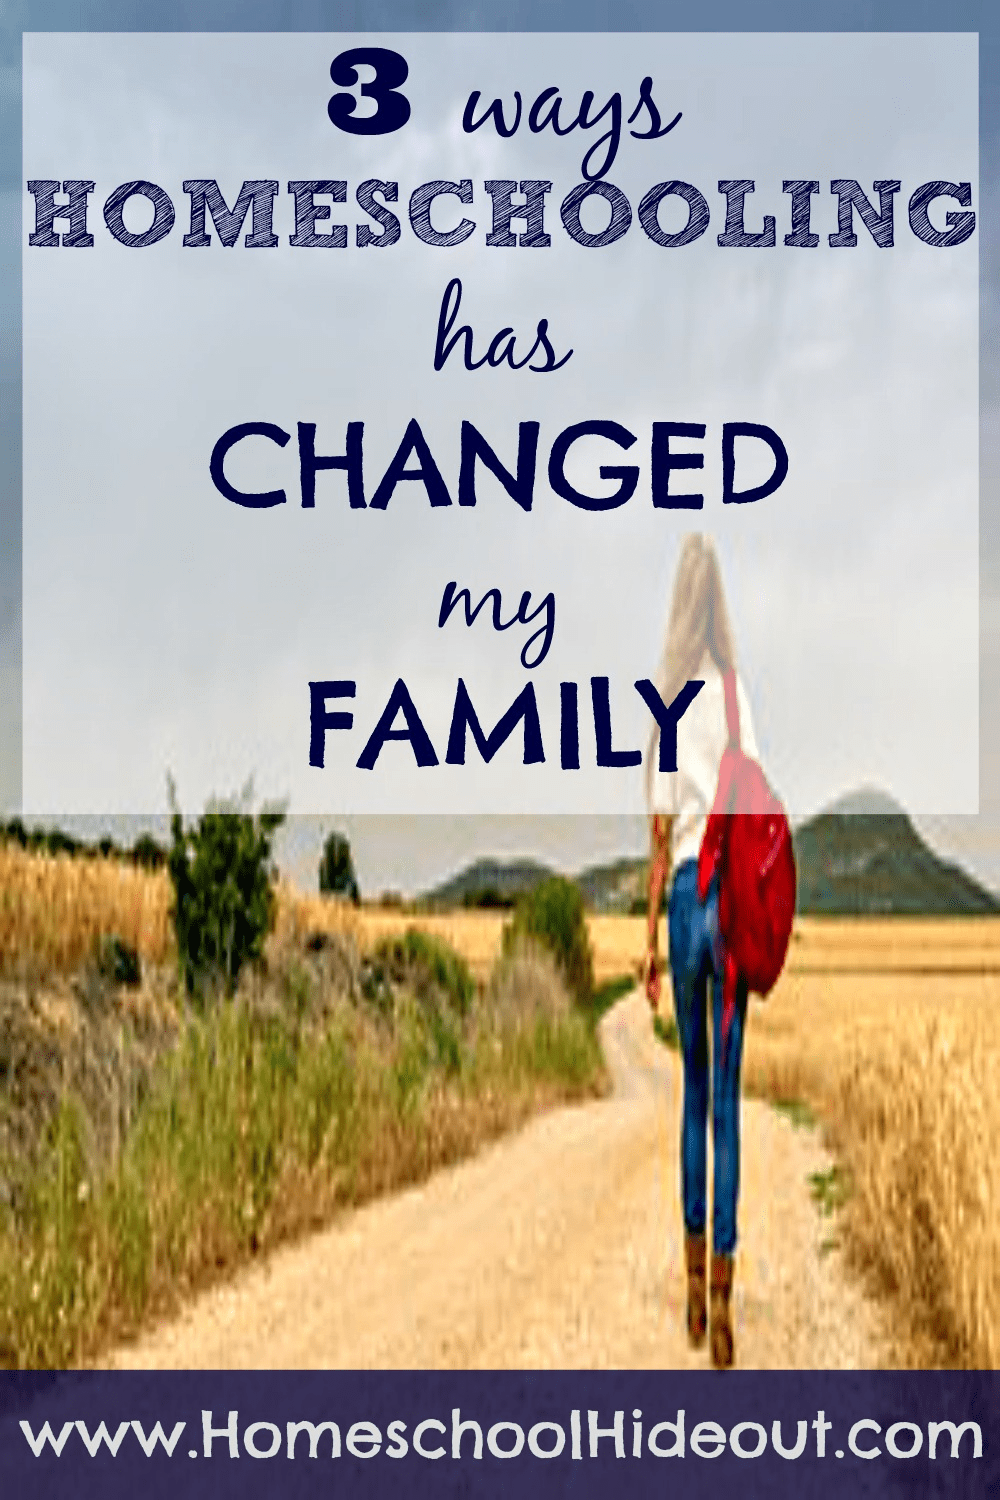 This is spot on! Homeschooling changes families in the most awesome ways. I never expected the amazing changes we have had so far in our HS journey.